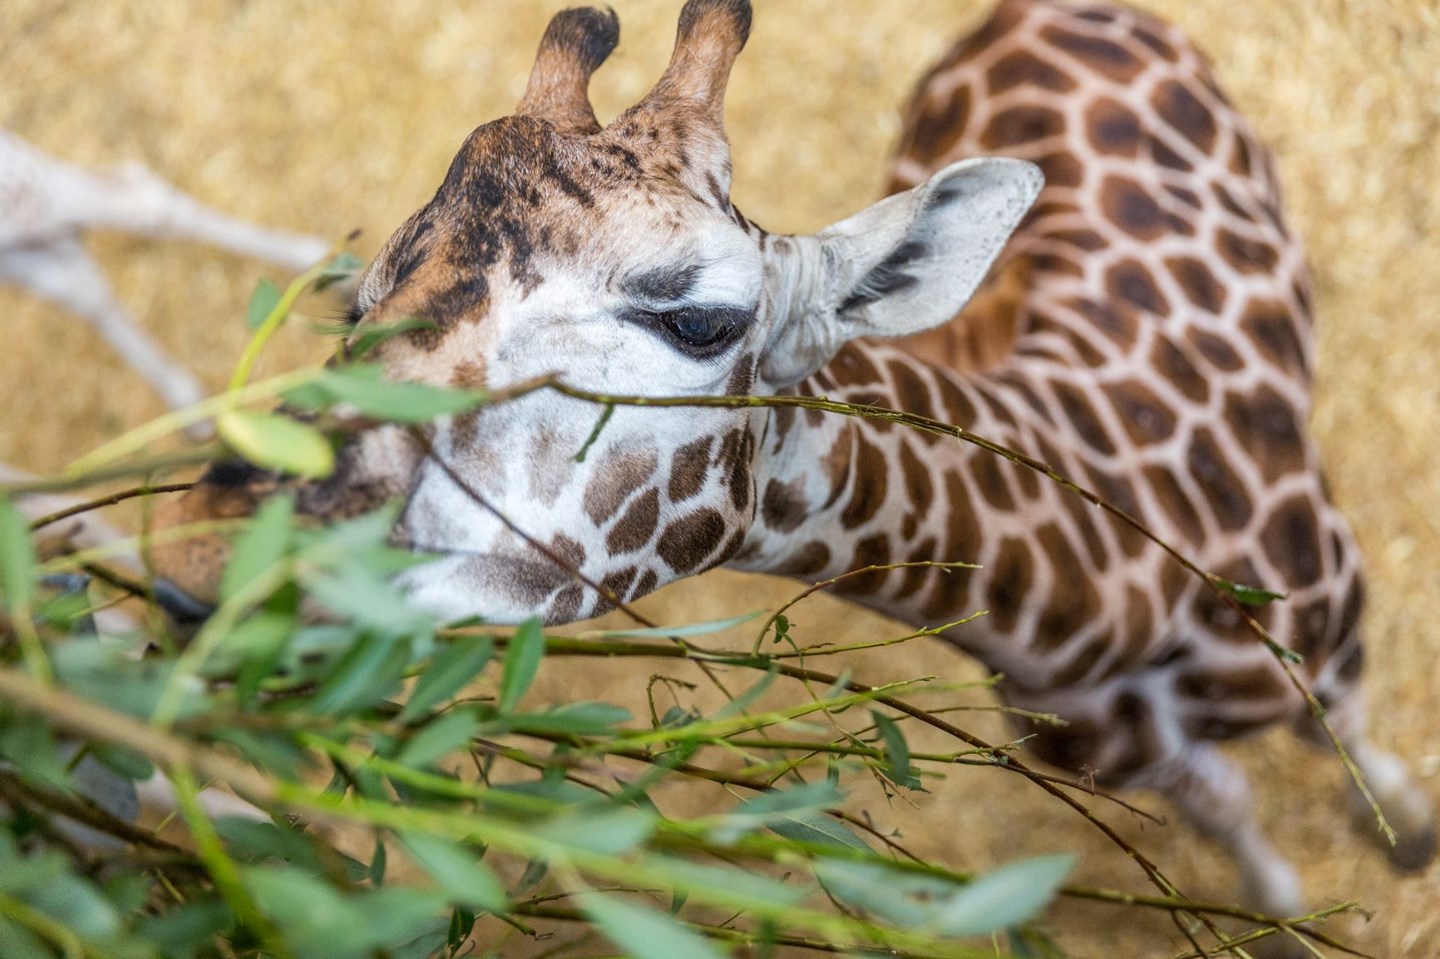 Giraffe reaches up to eat leaves 